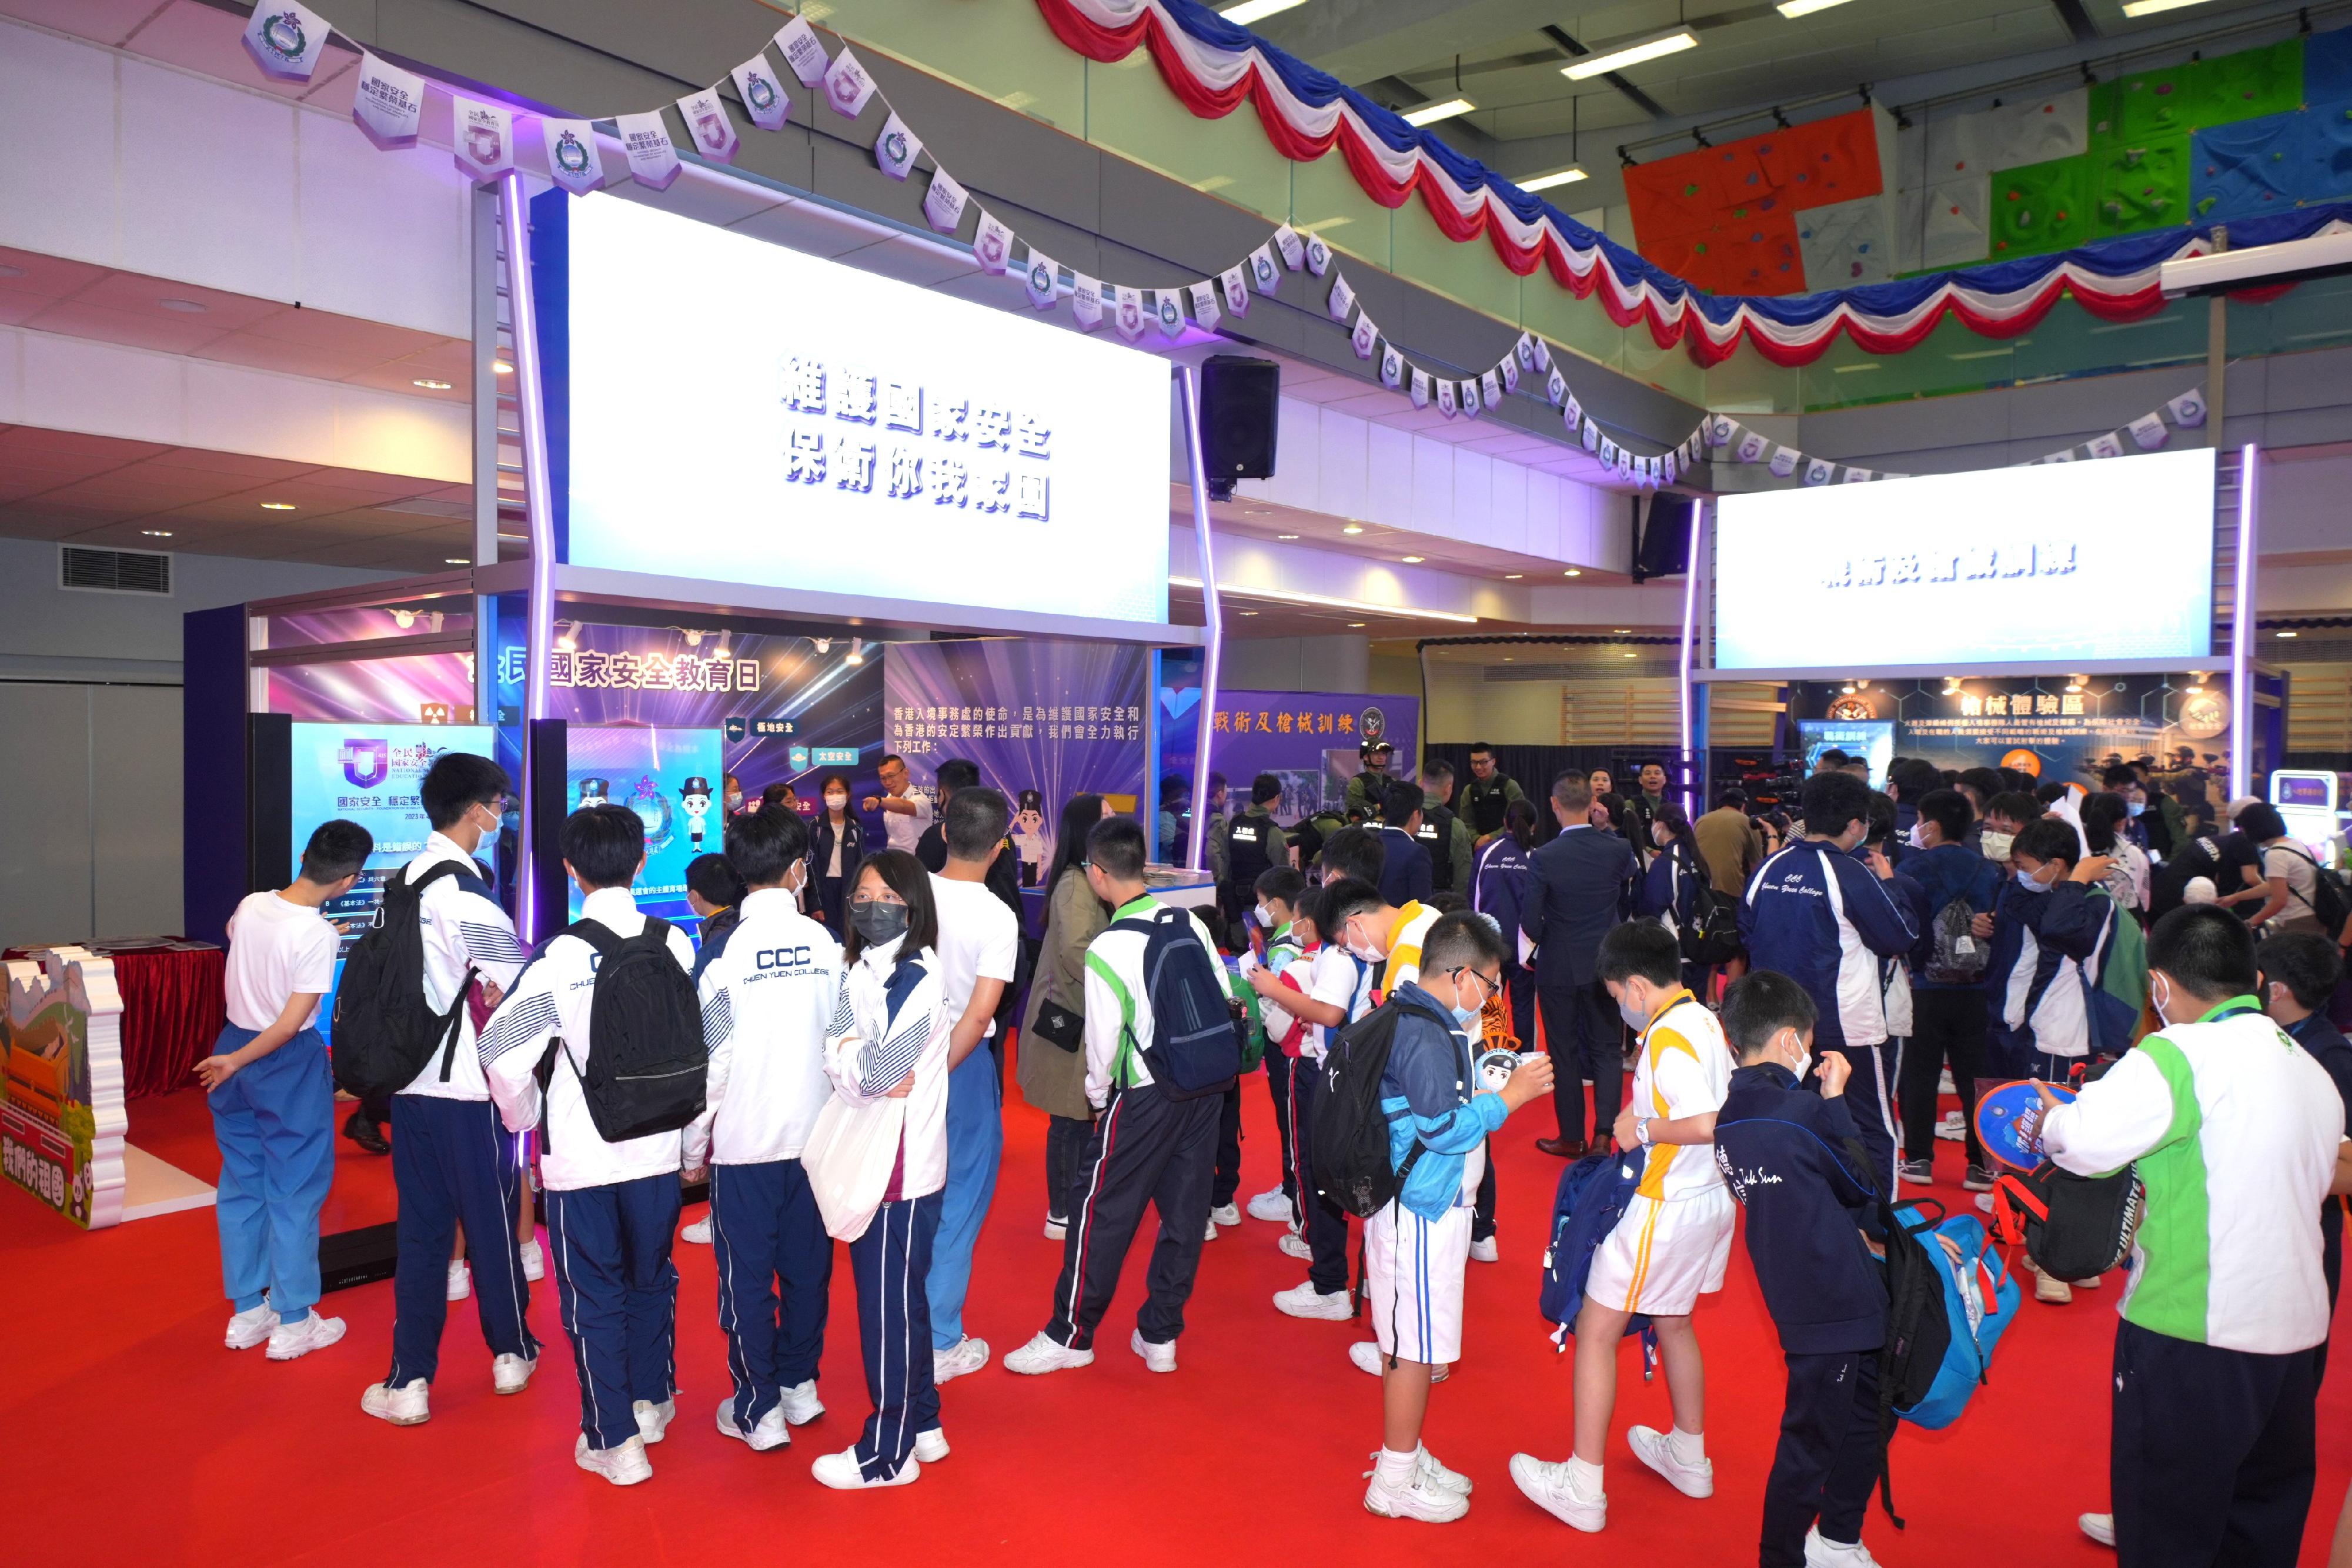 To support the National Security Education Day, the Immigration Service Institute of Training and Development held an open day today (April 15). Photo shows members of the public visited an exhibition booth.